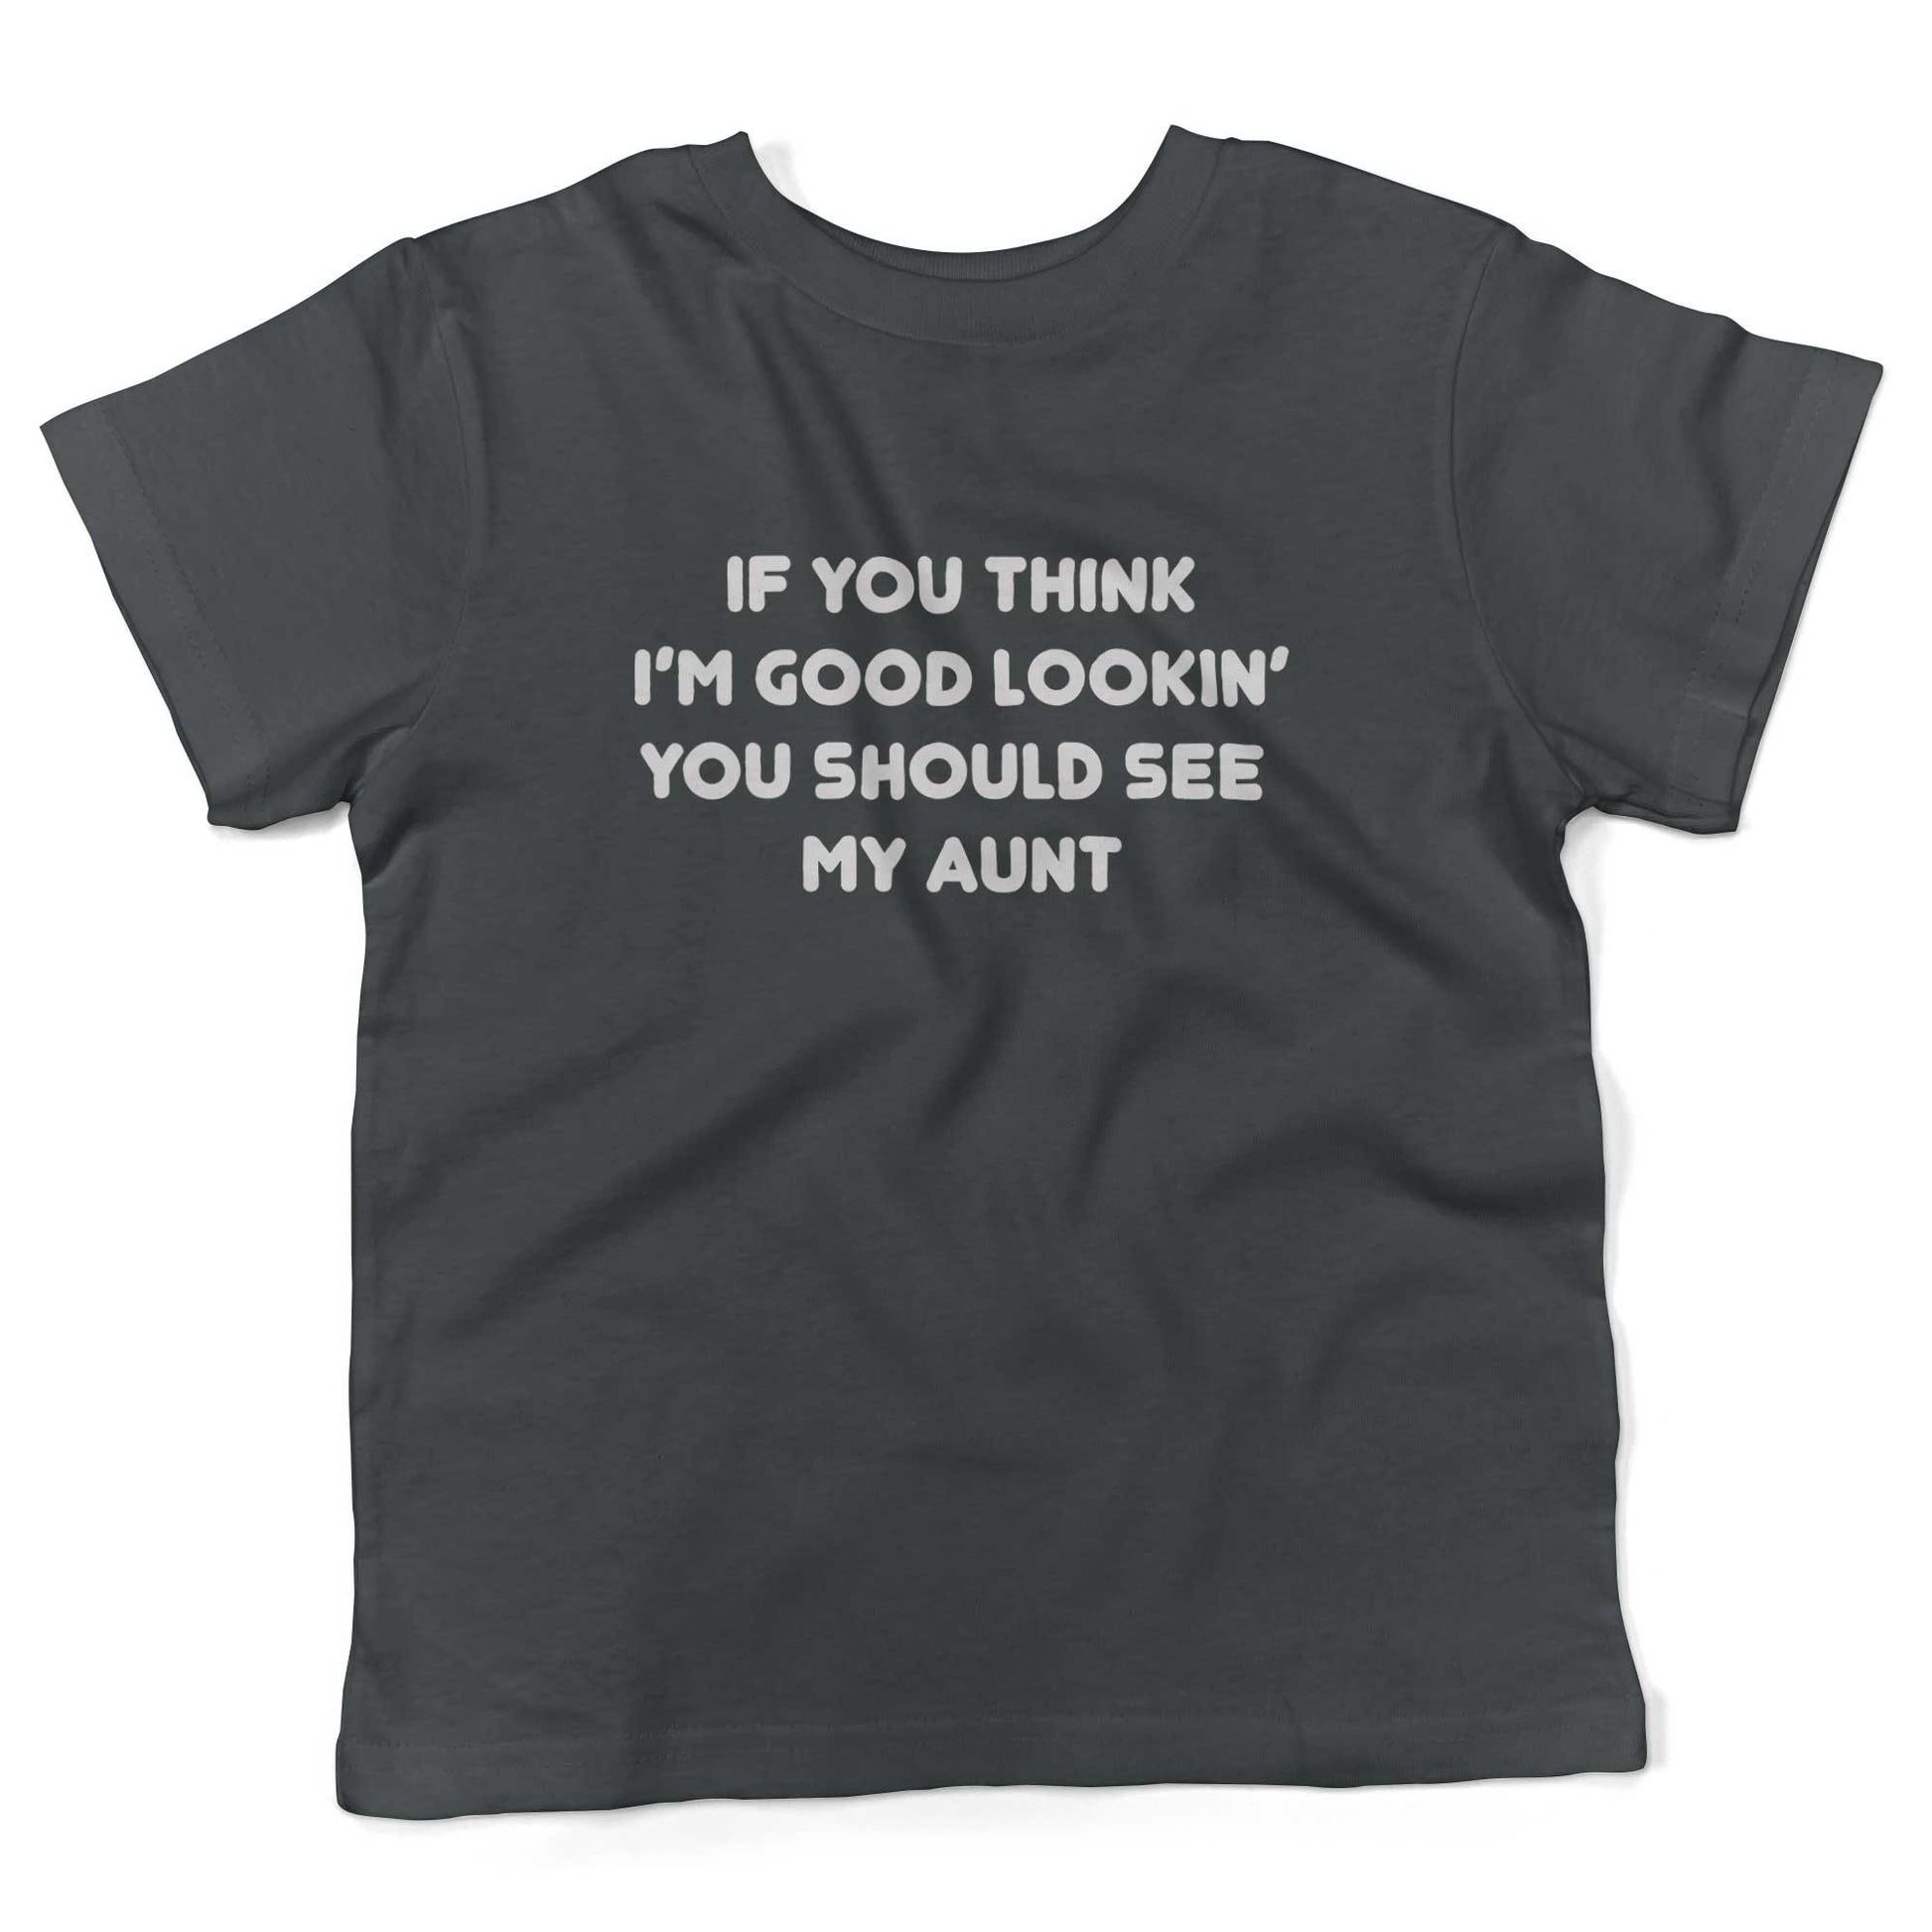 If You Think I'm Good Lookin' You Should See My Aunt Toddler Shirt-Asphalt-2T